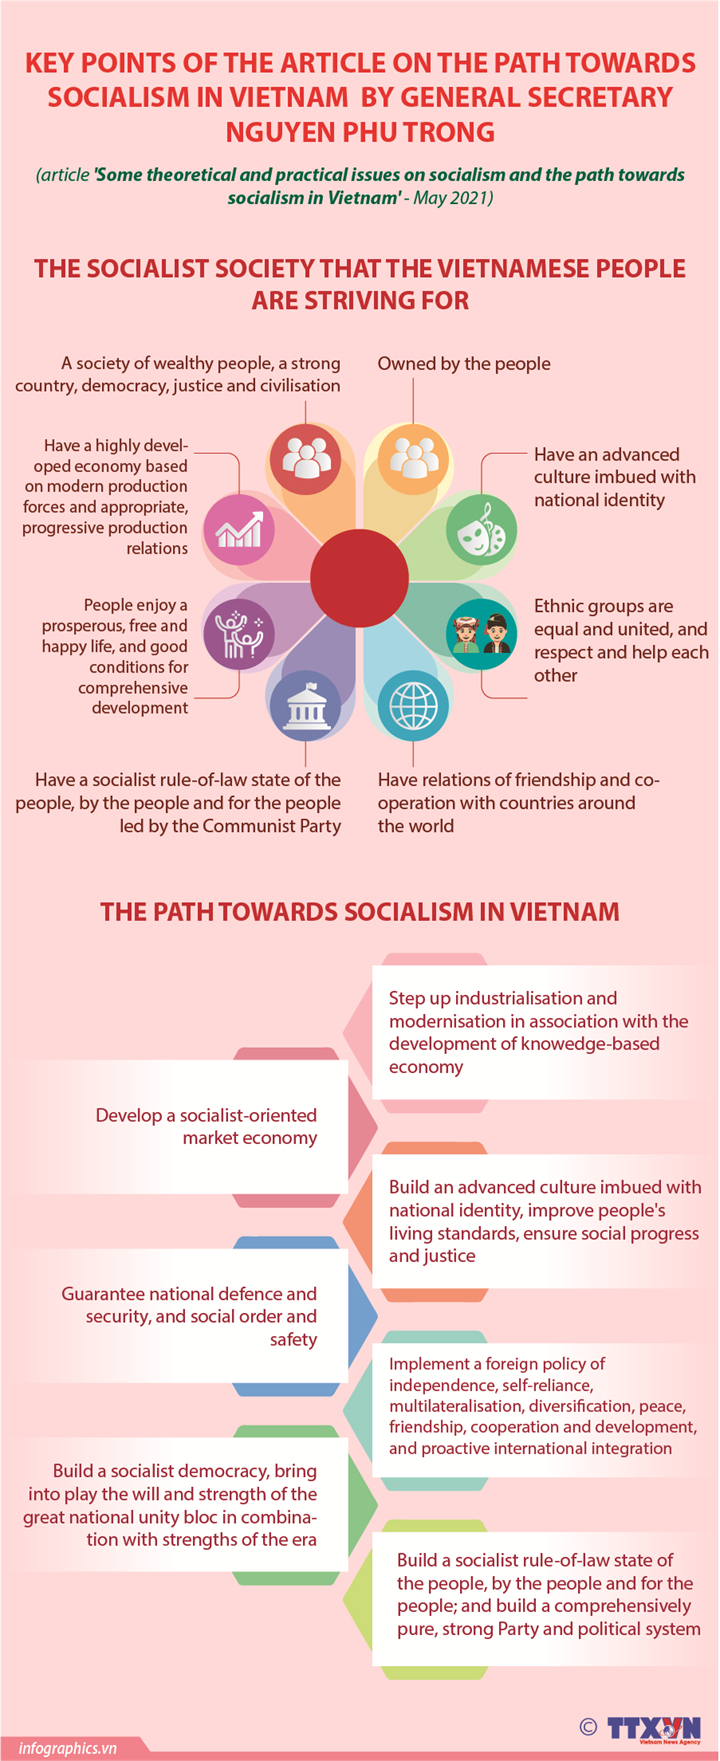 Theoretical and practical issues on socialism and path towards socialism in Vietnam